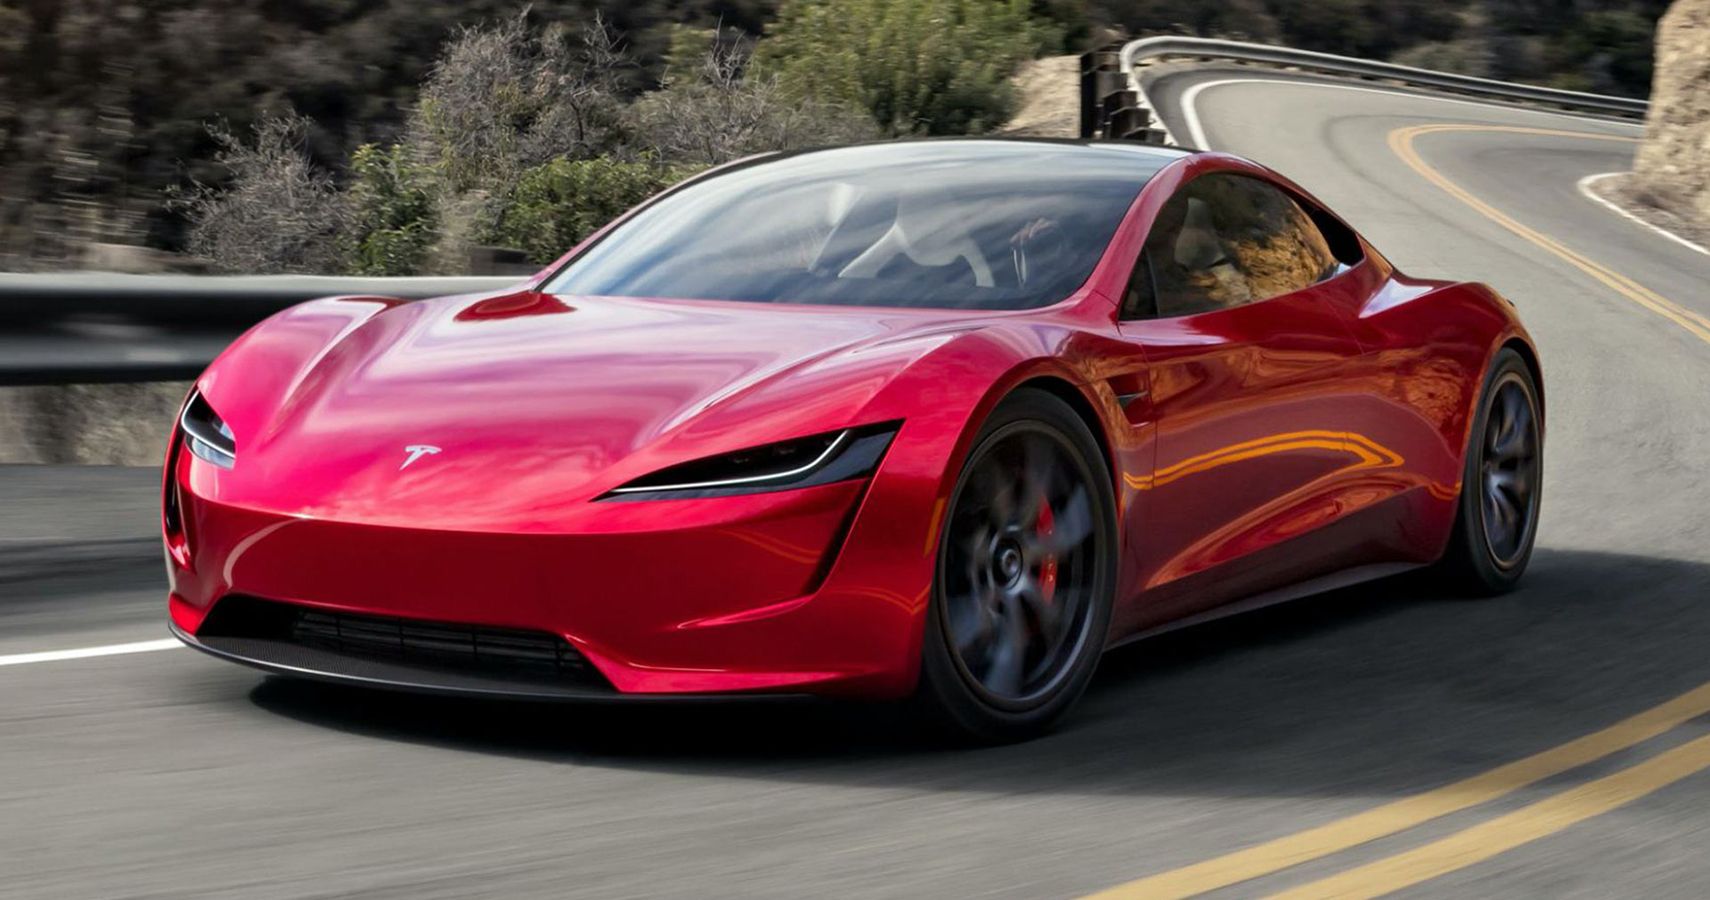 Tesla Roadster - The Quickest Car In The World